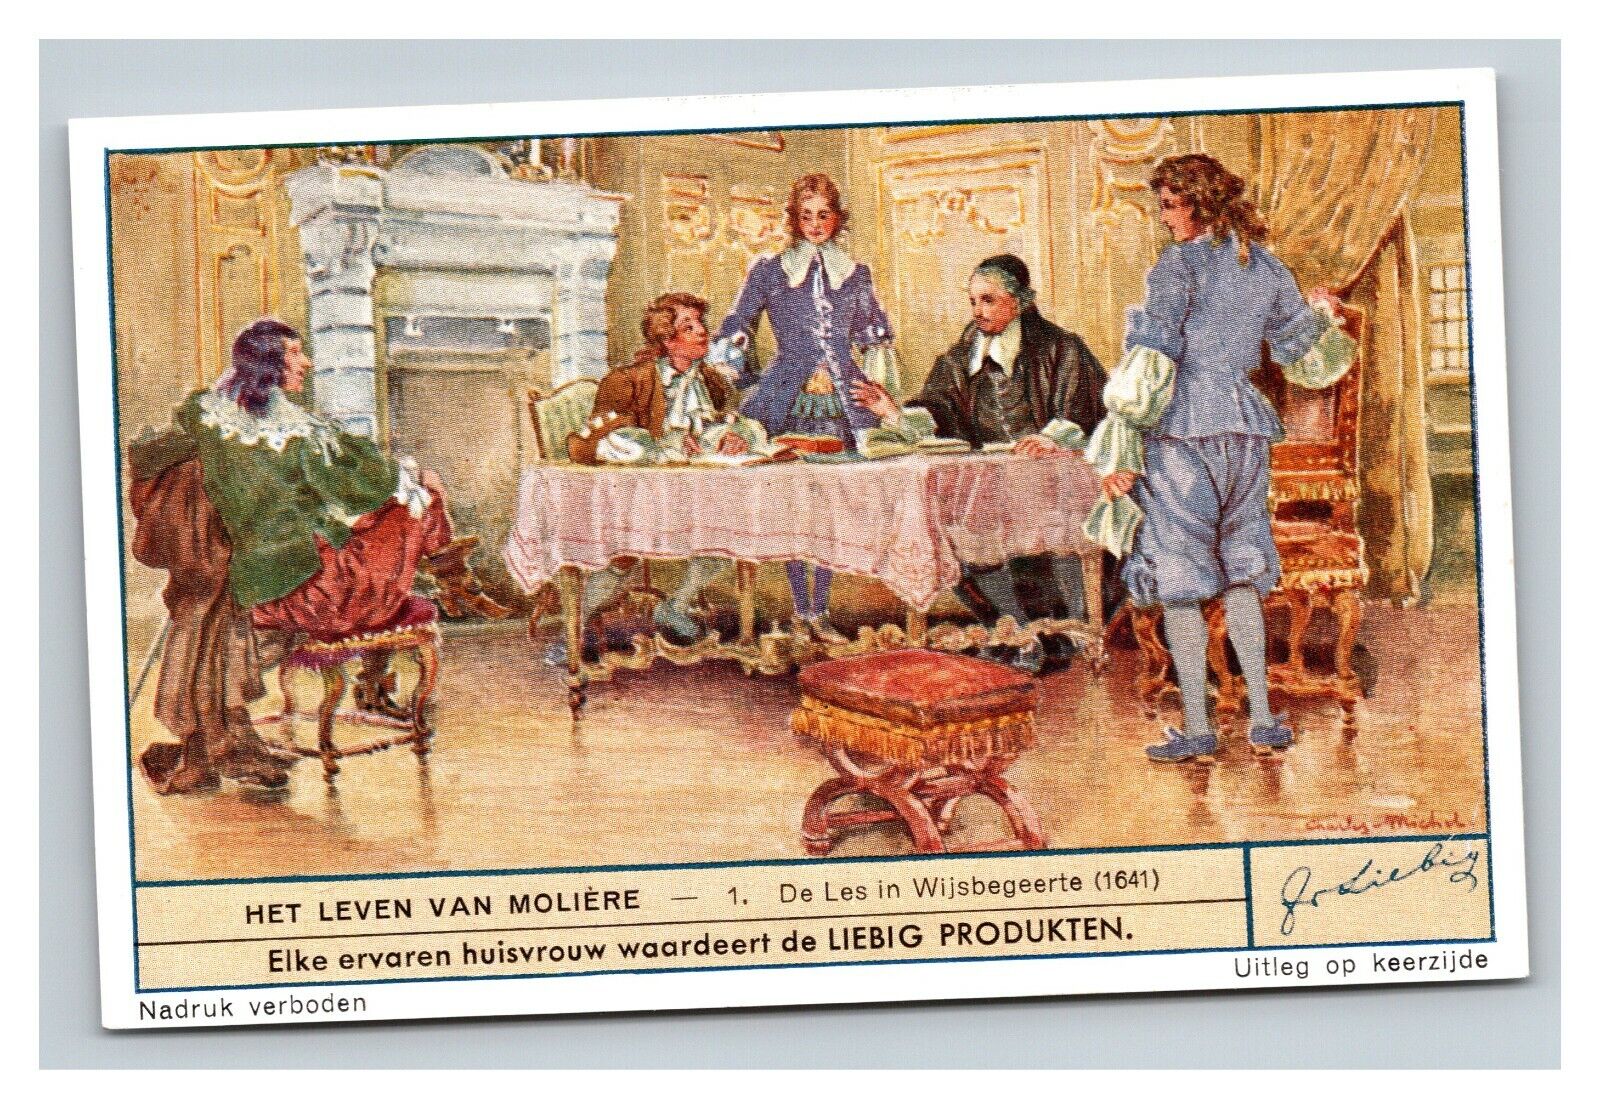 Vintage Liebig Trade Card - Dutch - 2 of The Life of Molière Playwriter Set